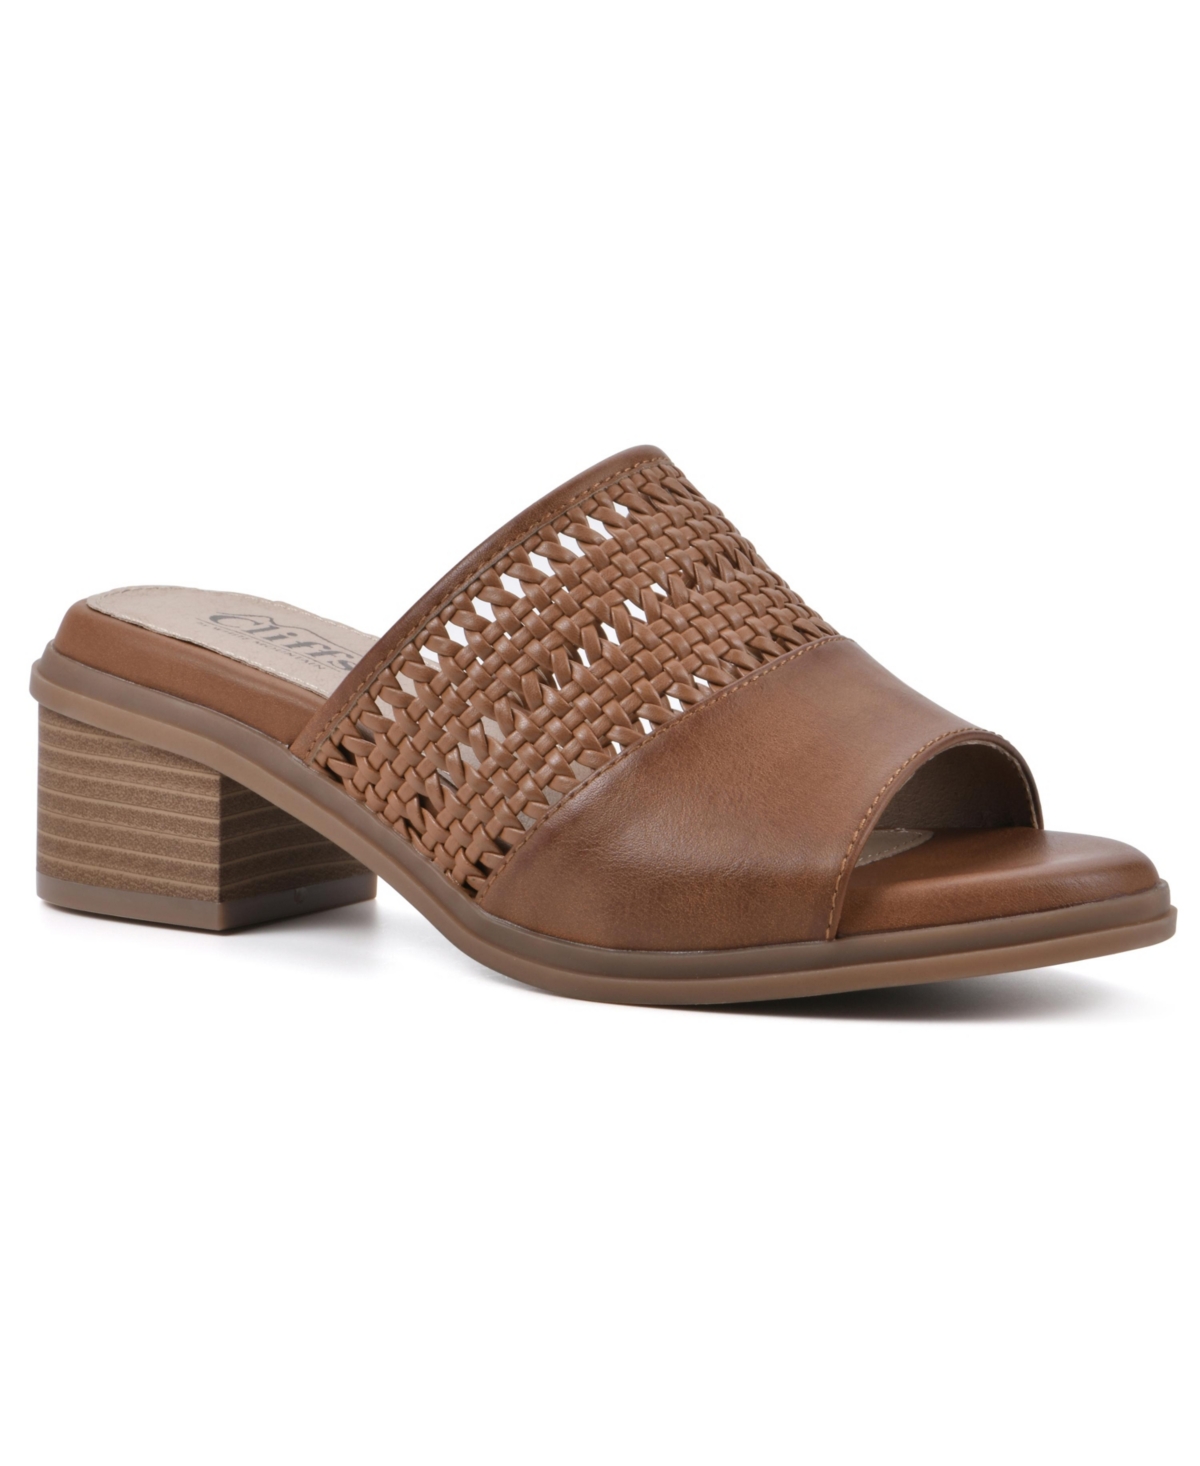 Women's Corley Comfort Sandal - Whiskey, Burnished, Smooth